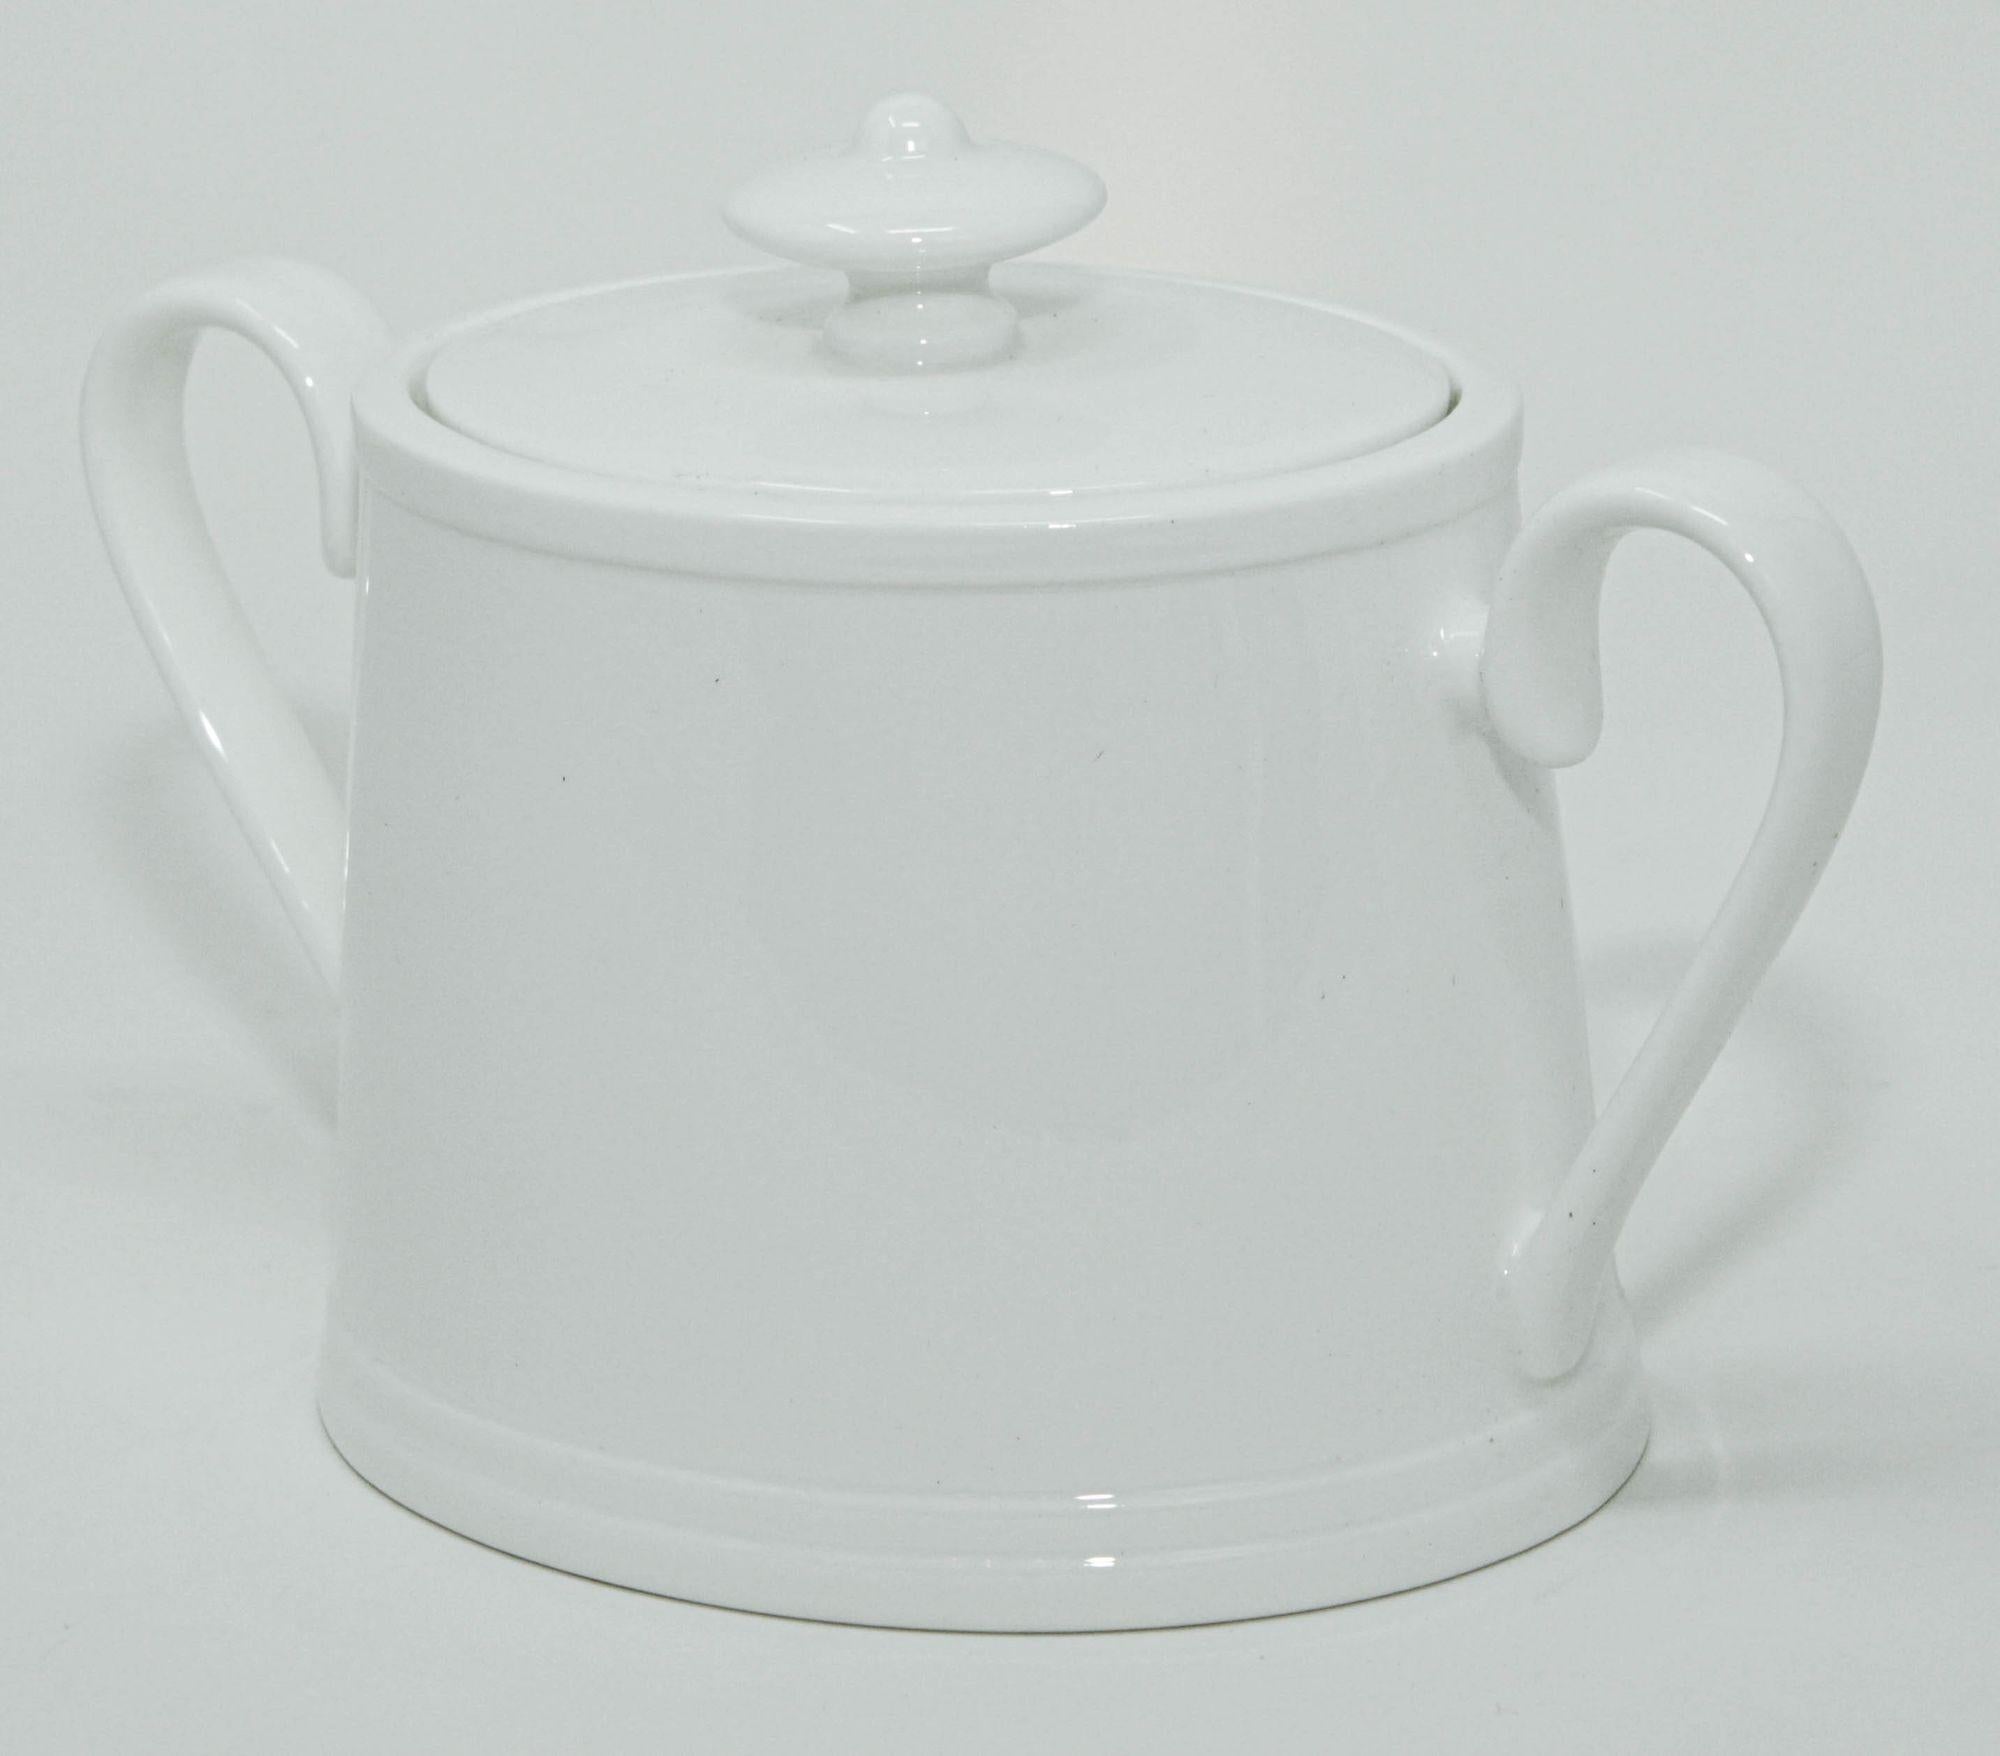 Villeroy & Boch Stella Hotel white Bone China Sugar Bowl with Cover In Good Condition For Sale In North Hollywood, CA